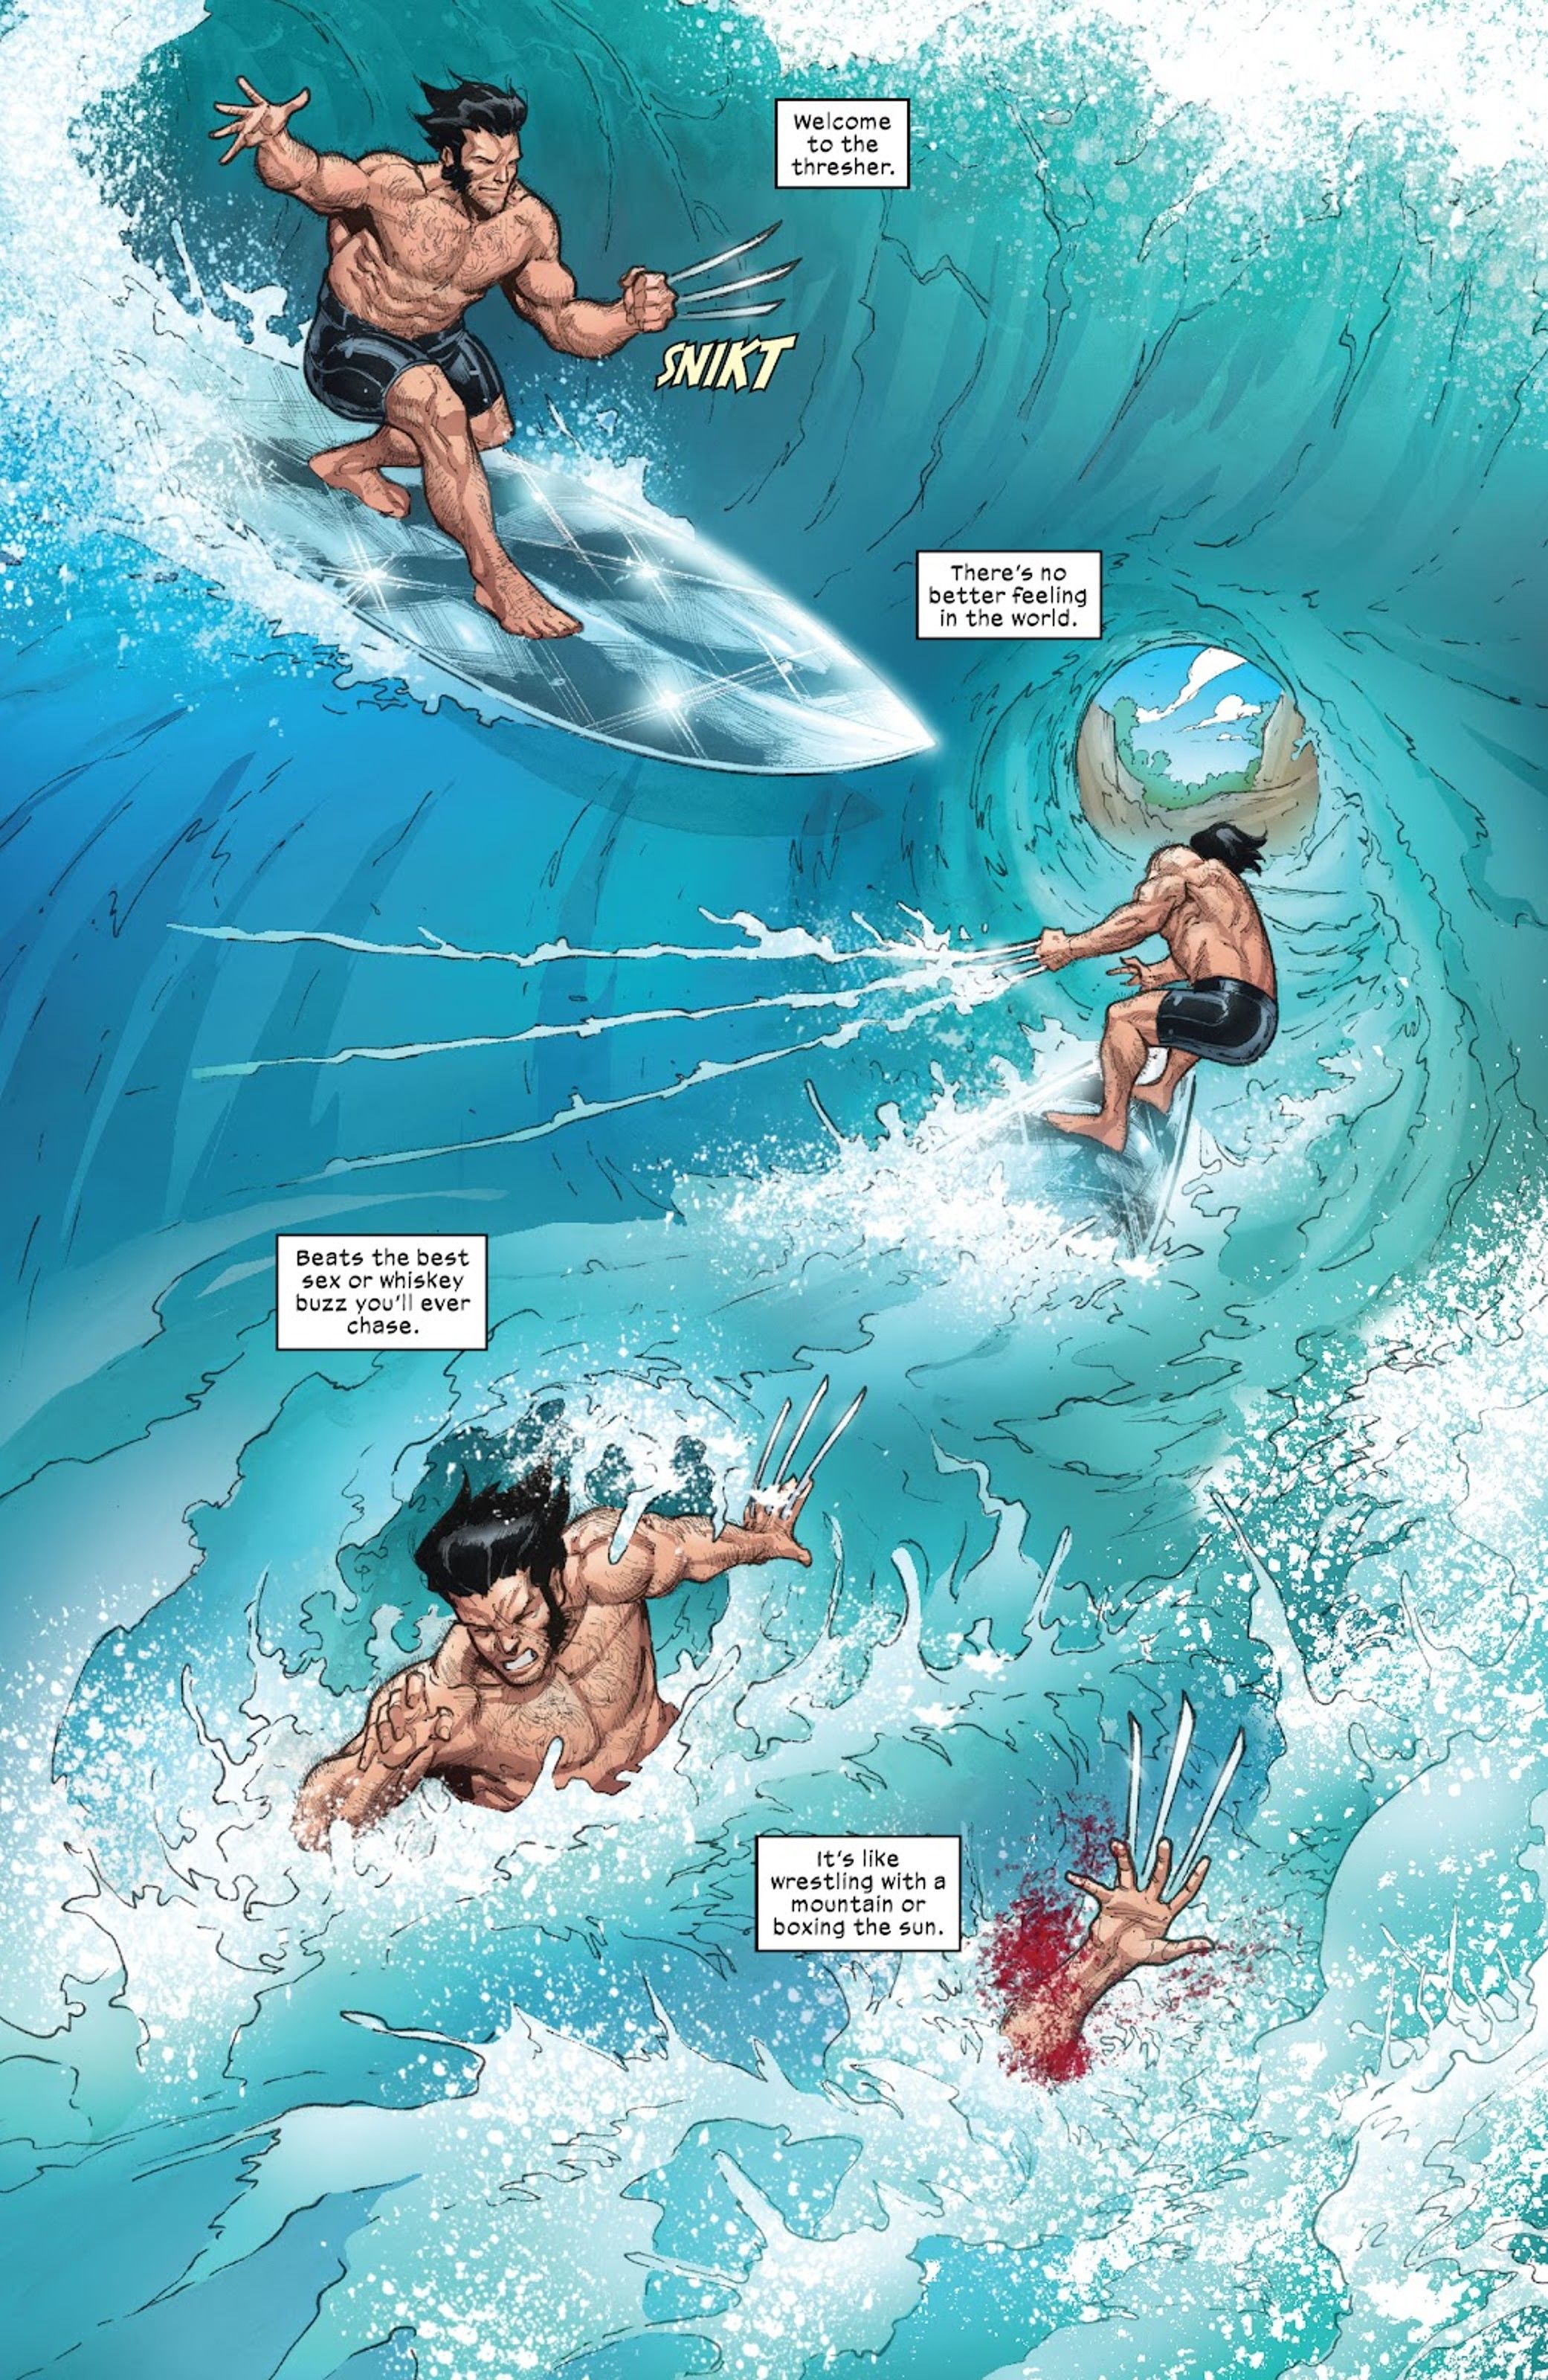 Wolverine drowning with adamantium surfboard.